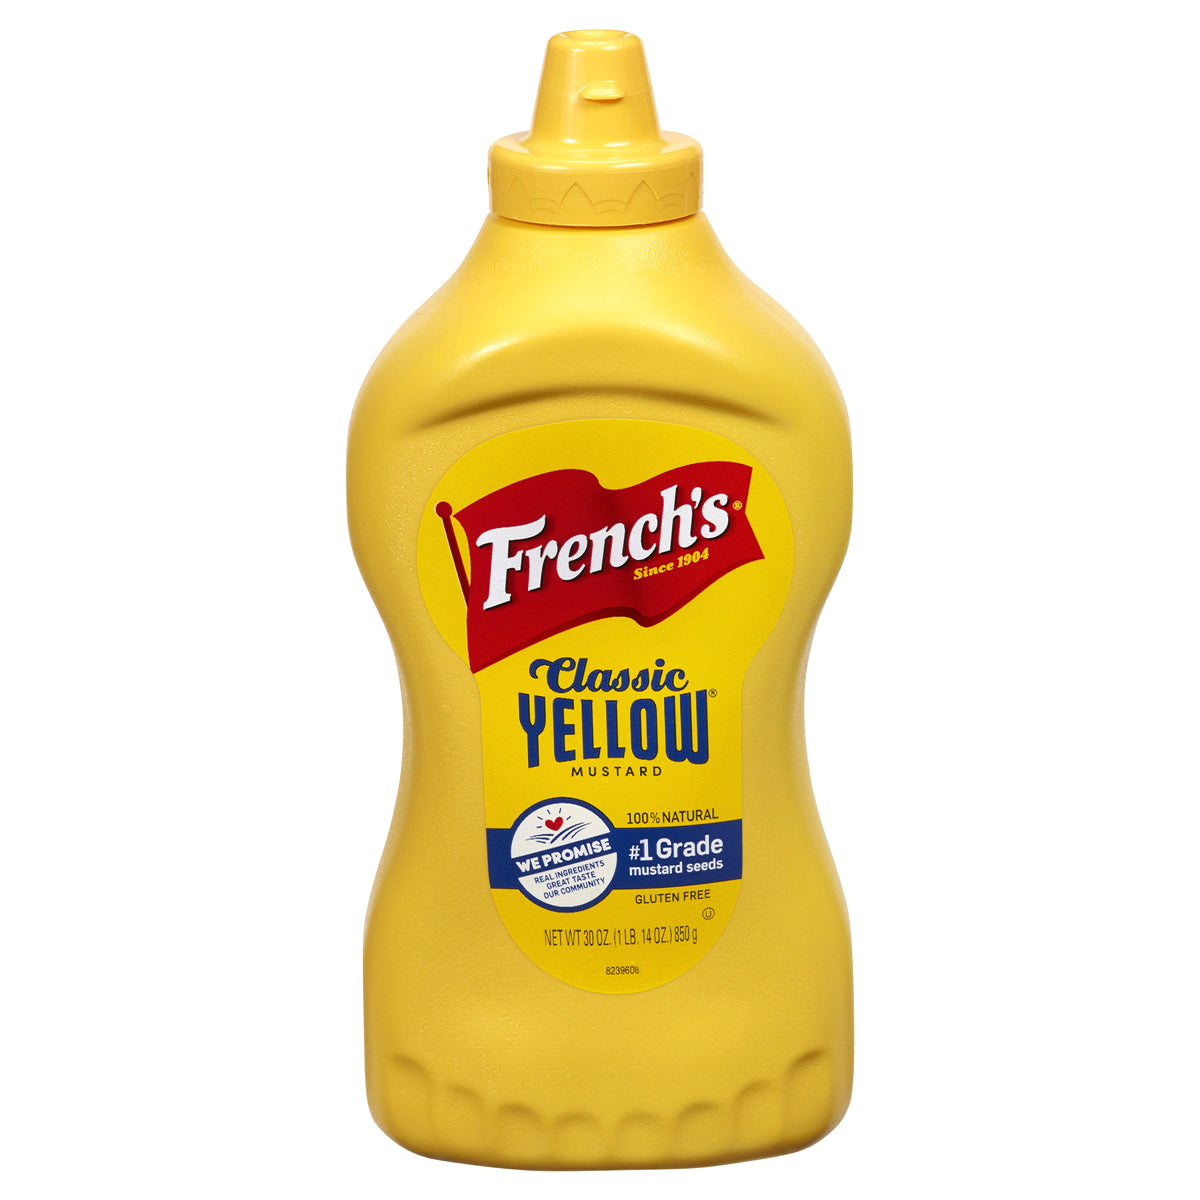 stm>French's Classic Yellow Mustard, Carrefour, 7oz, 195g